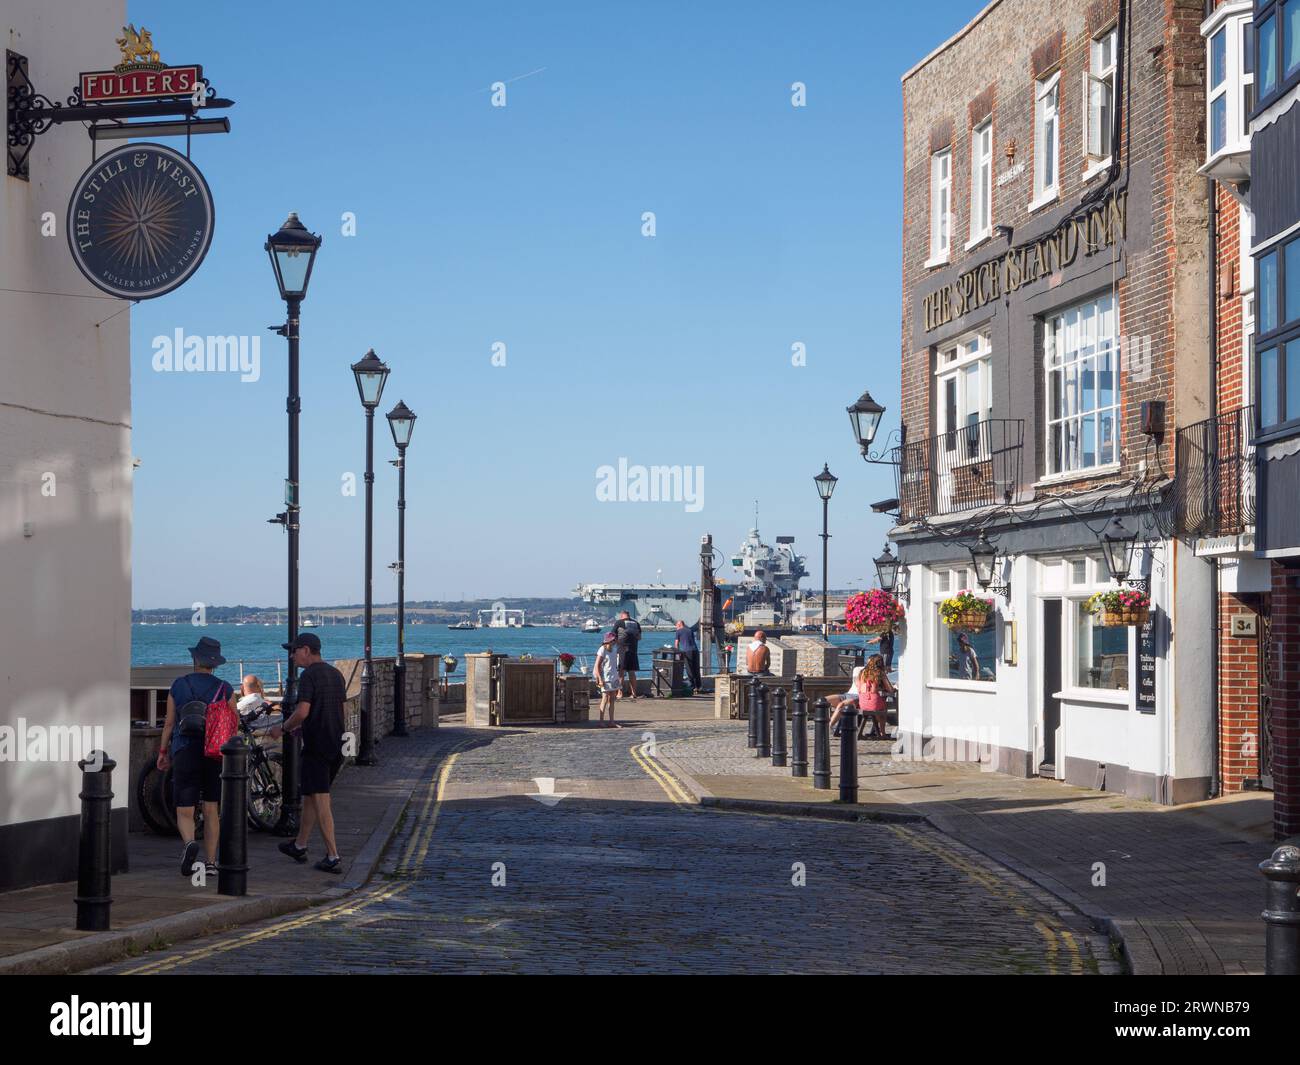 The Spice Island und still and West Public Houses am Bath Square, Portsmouth Point Stockfoto